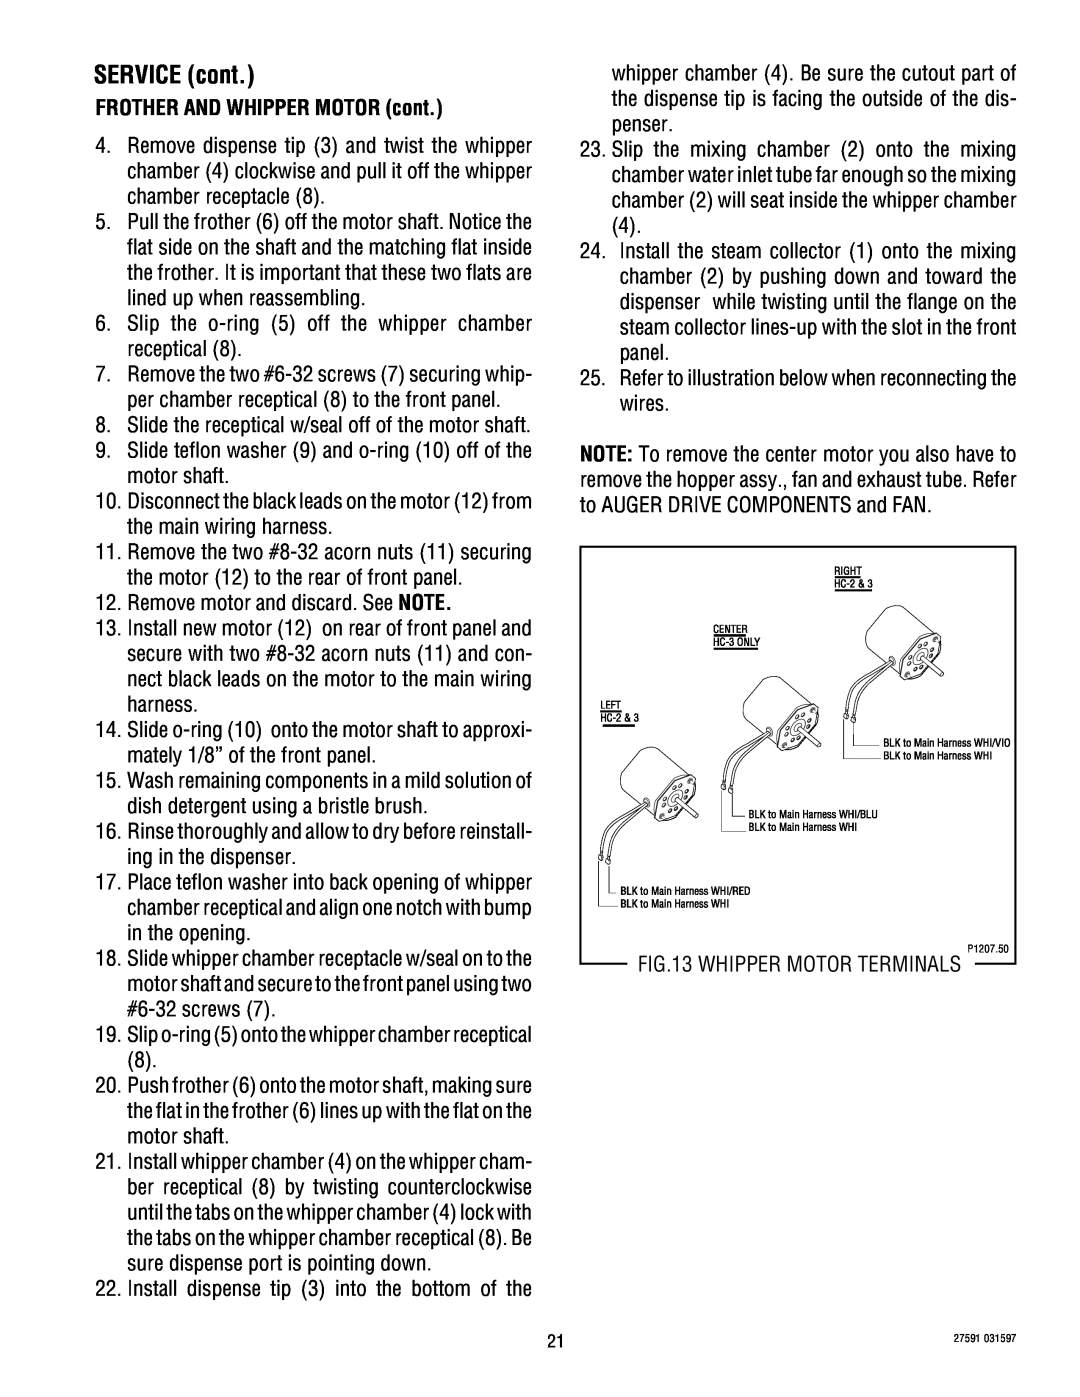 Bunn HC-2 HC-3 service manual FROTHER AND WHIPPER MOTOR cont, SERVICE cont 